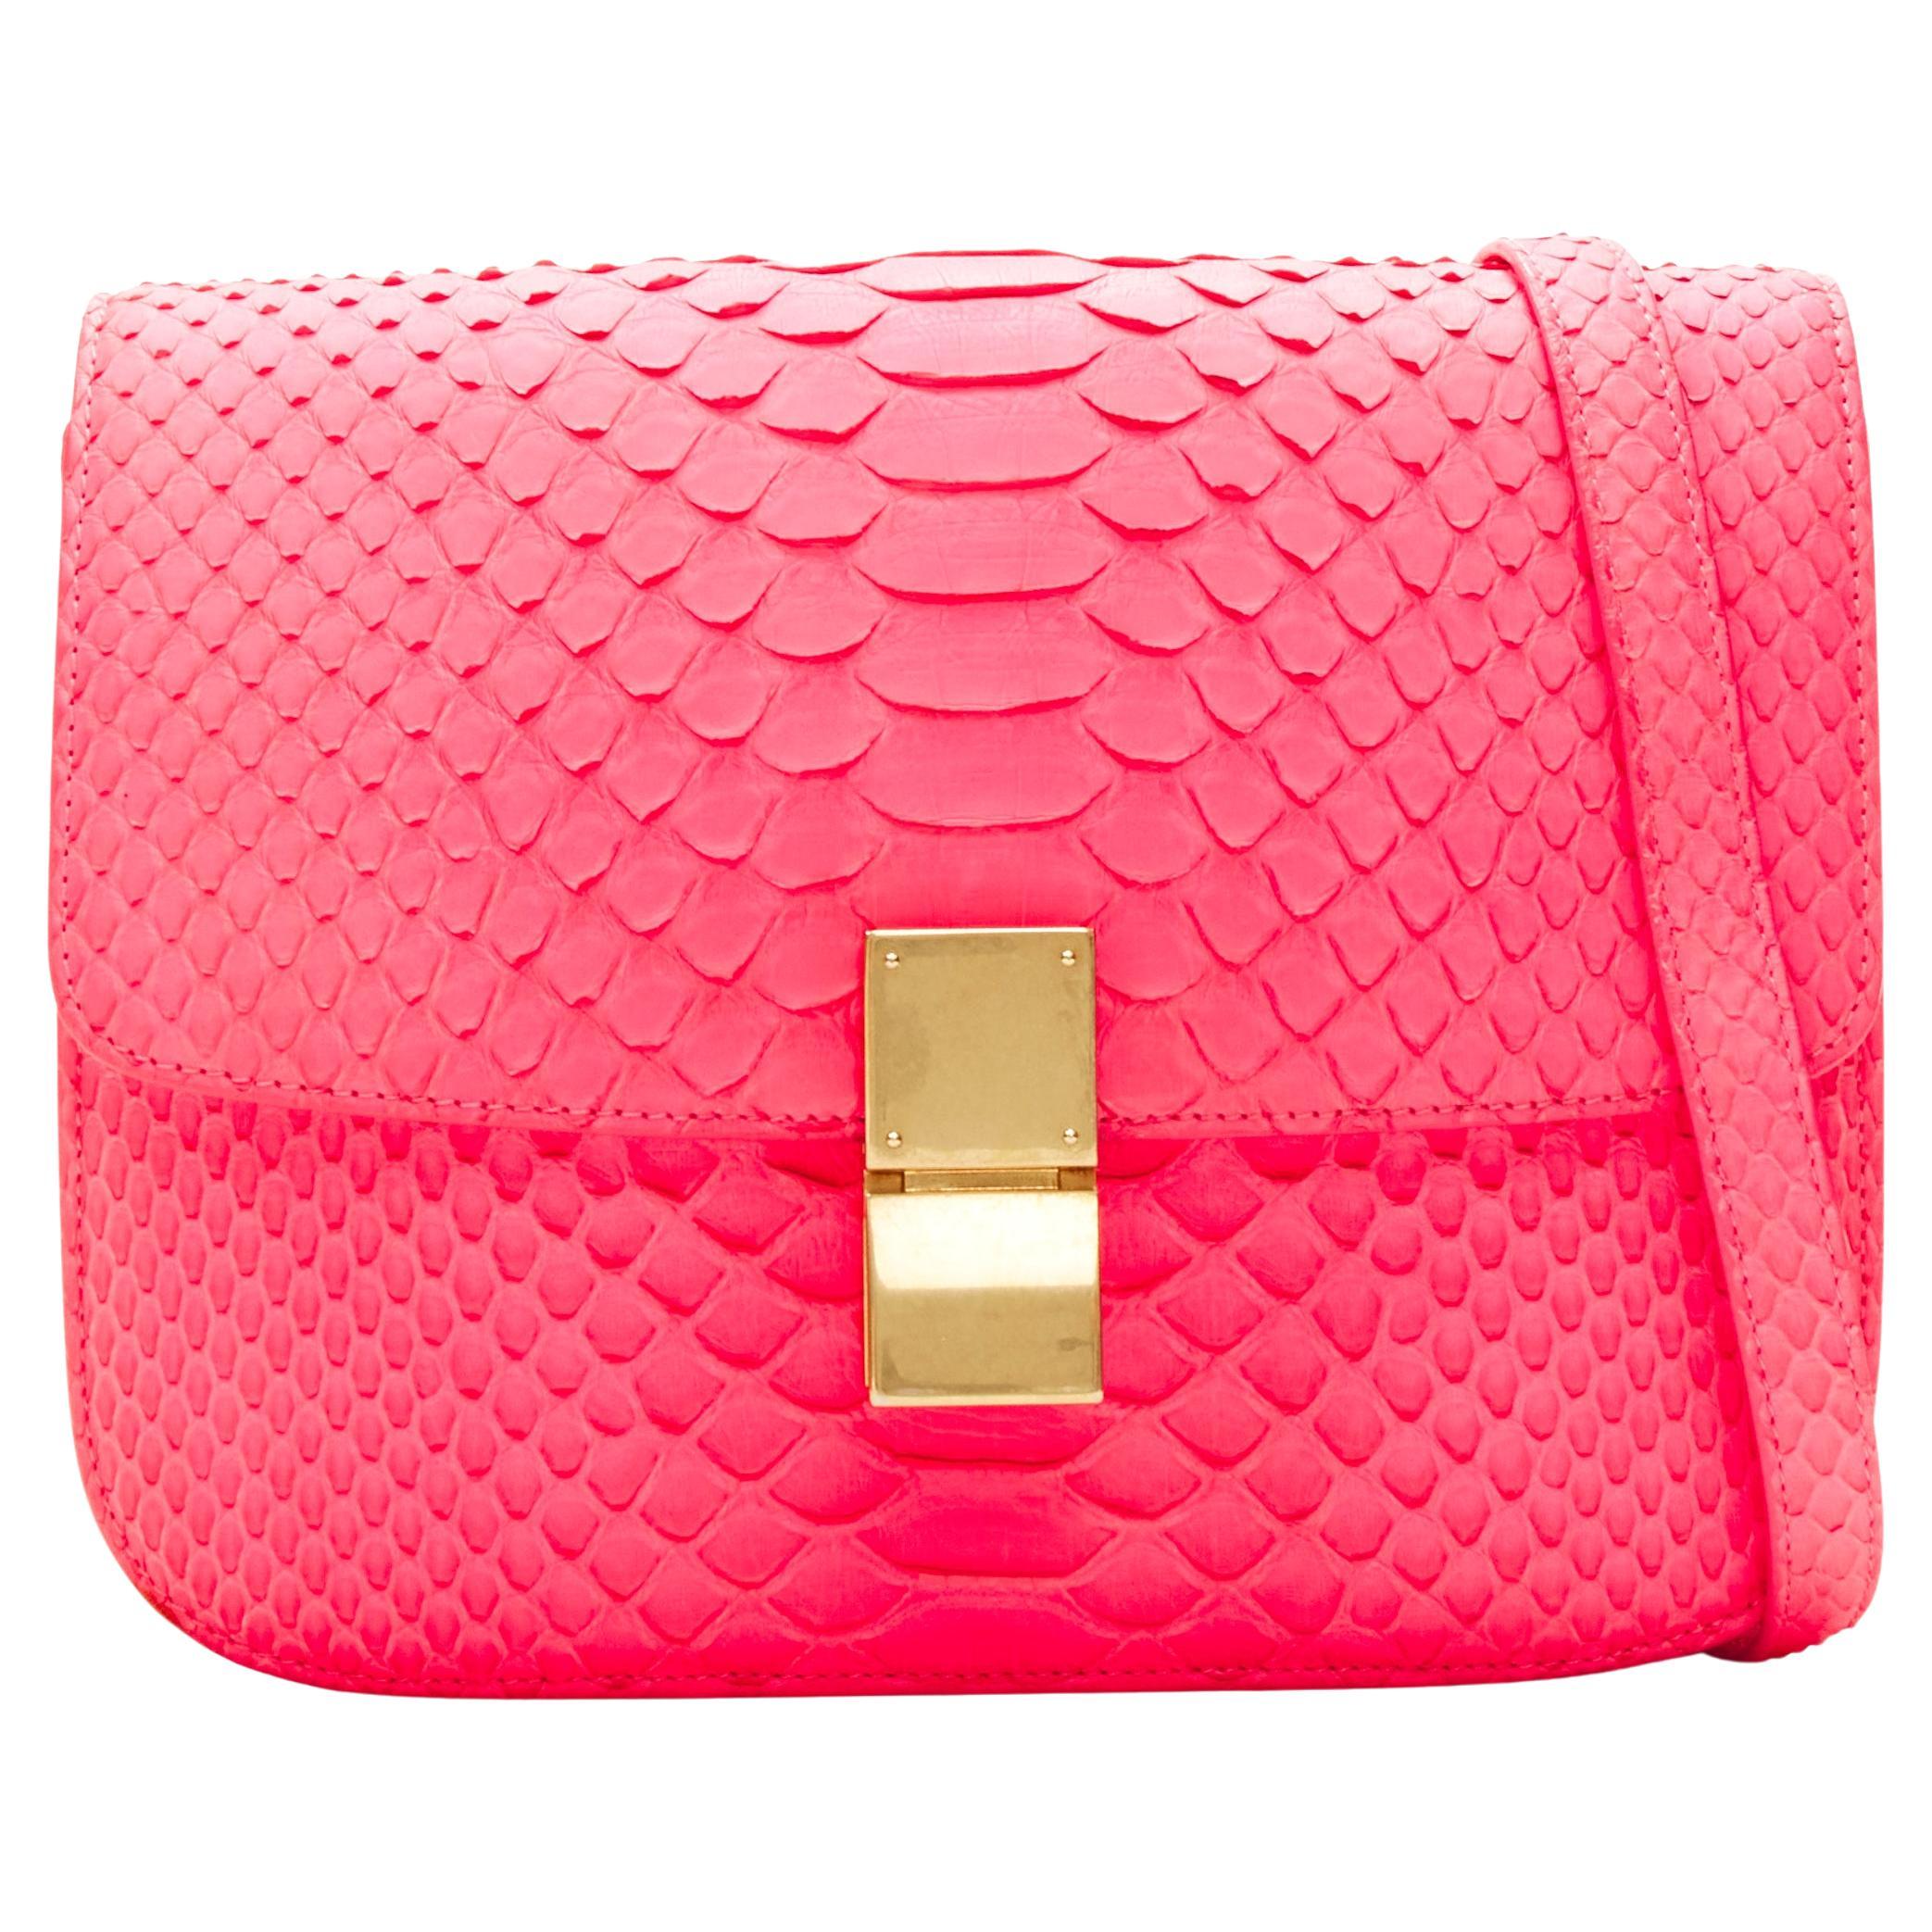 OLD CELINE Medium Classic Box Bag neon pink scaled leather flap crossbody For Sale